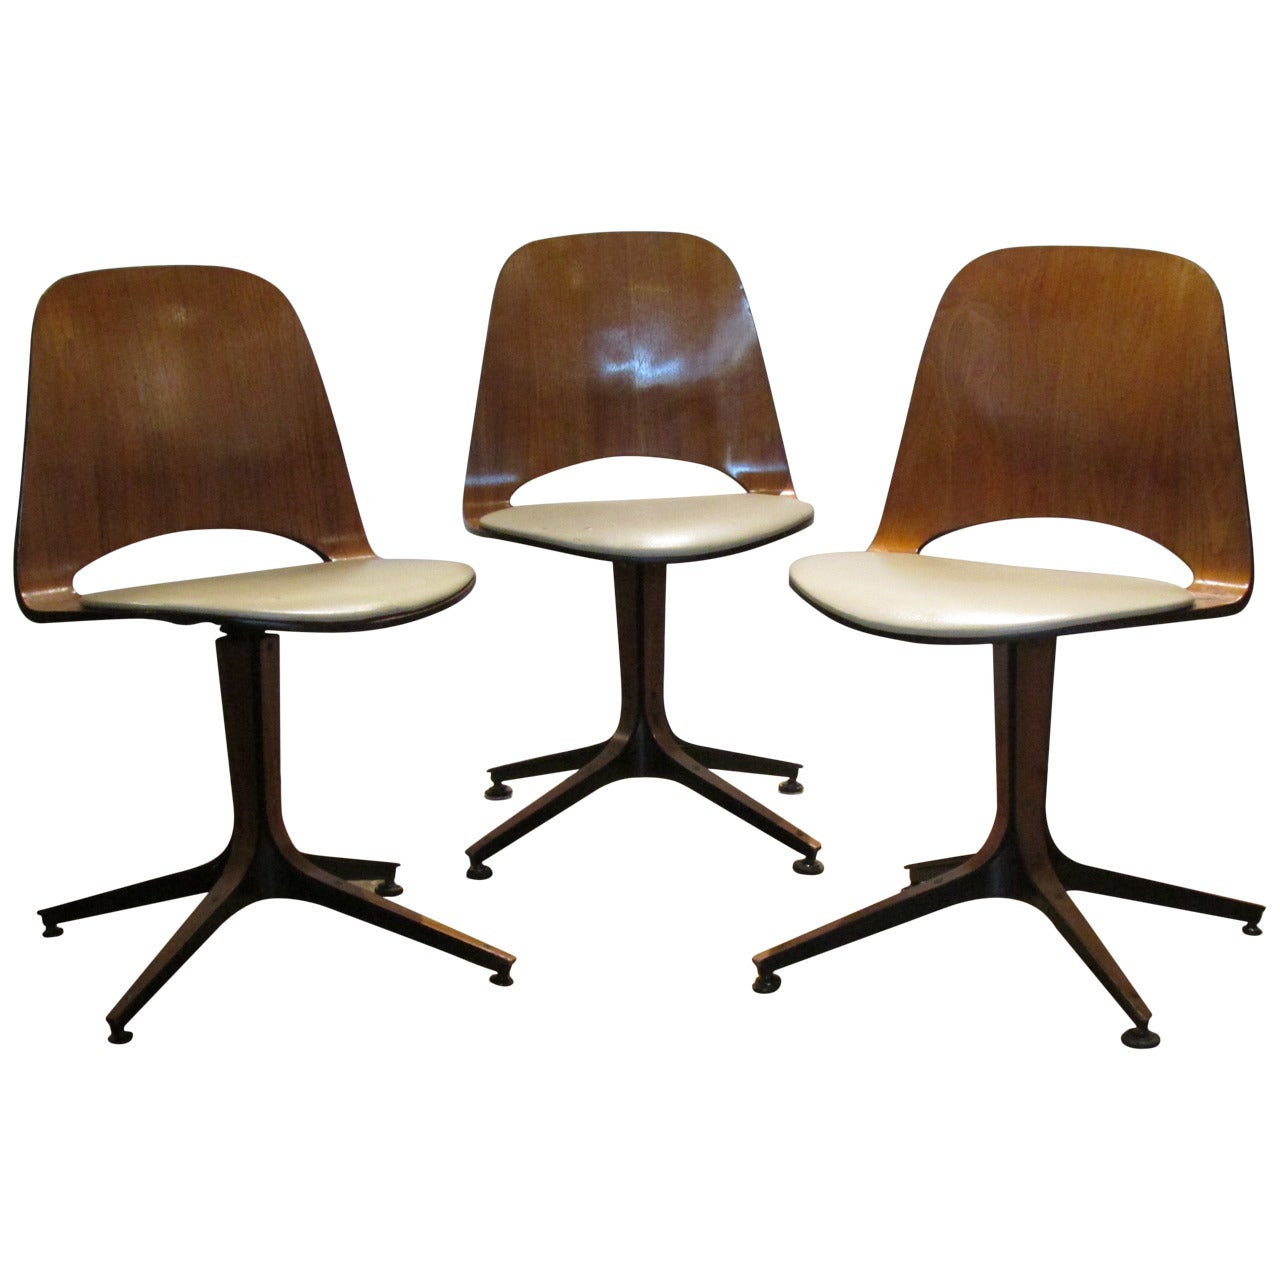 George Mulhauser Swivel Chairs for Plycraft  - 2 available